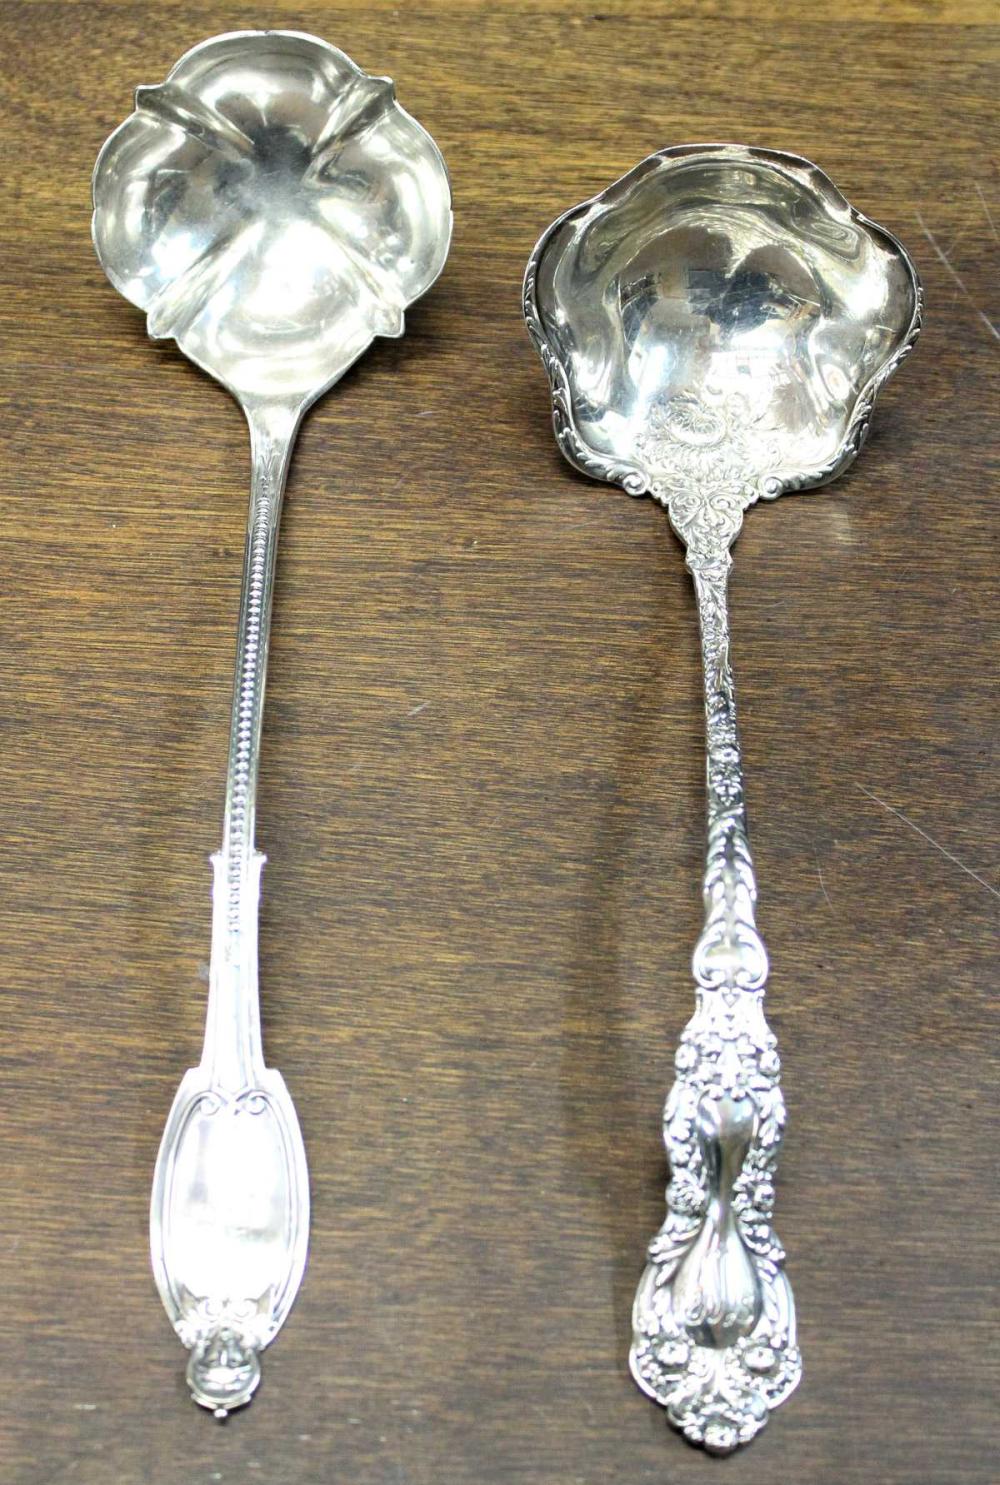 TWO SOLID SILVER SOUP LADLES, INCLUDING